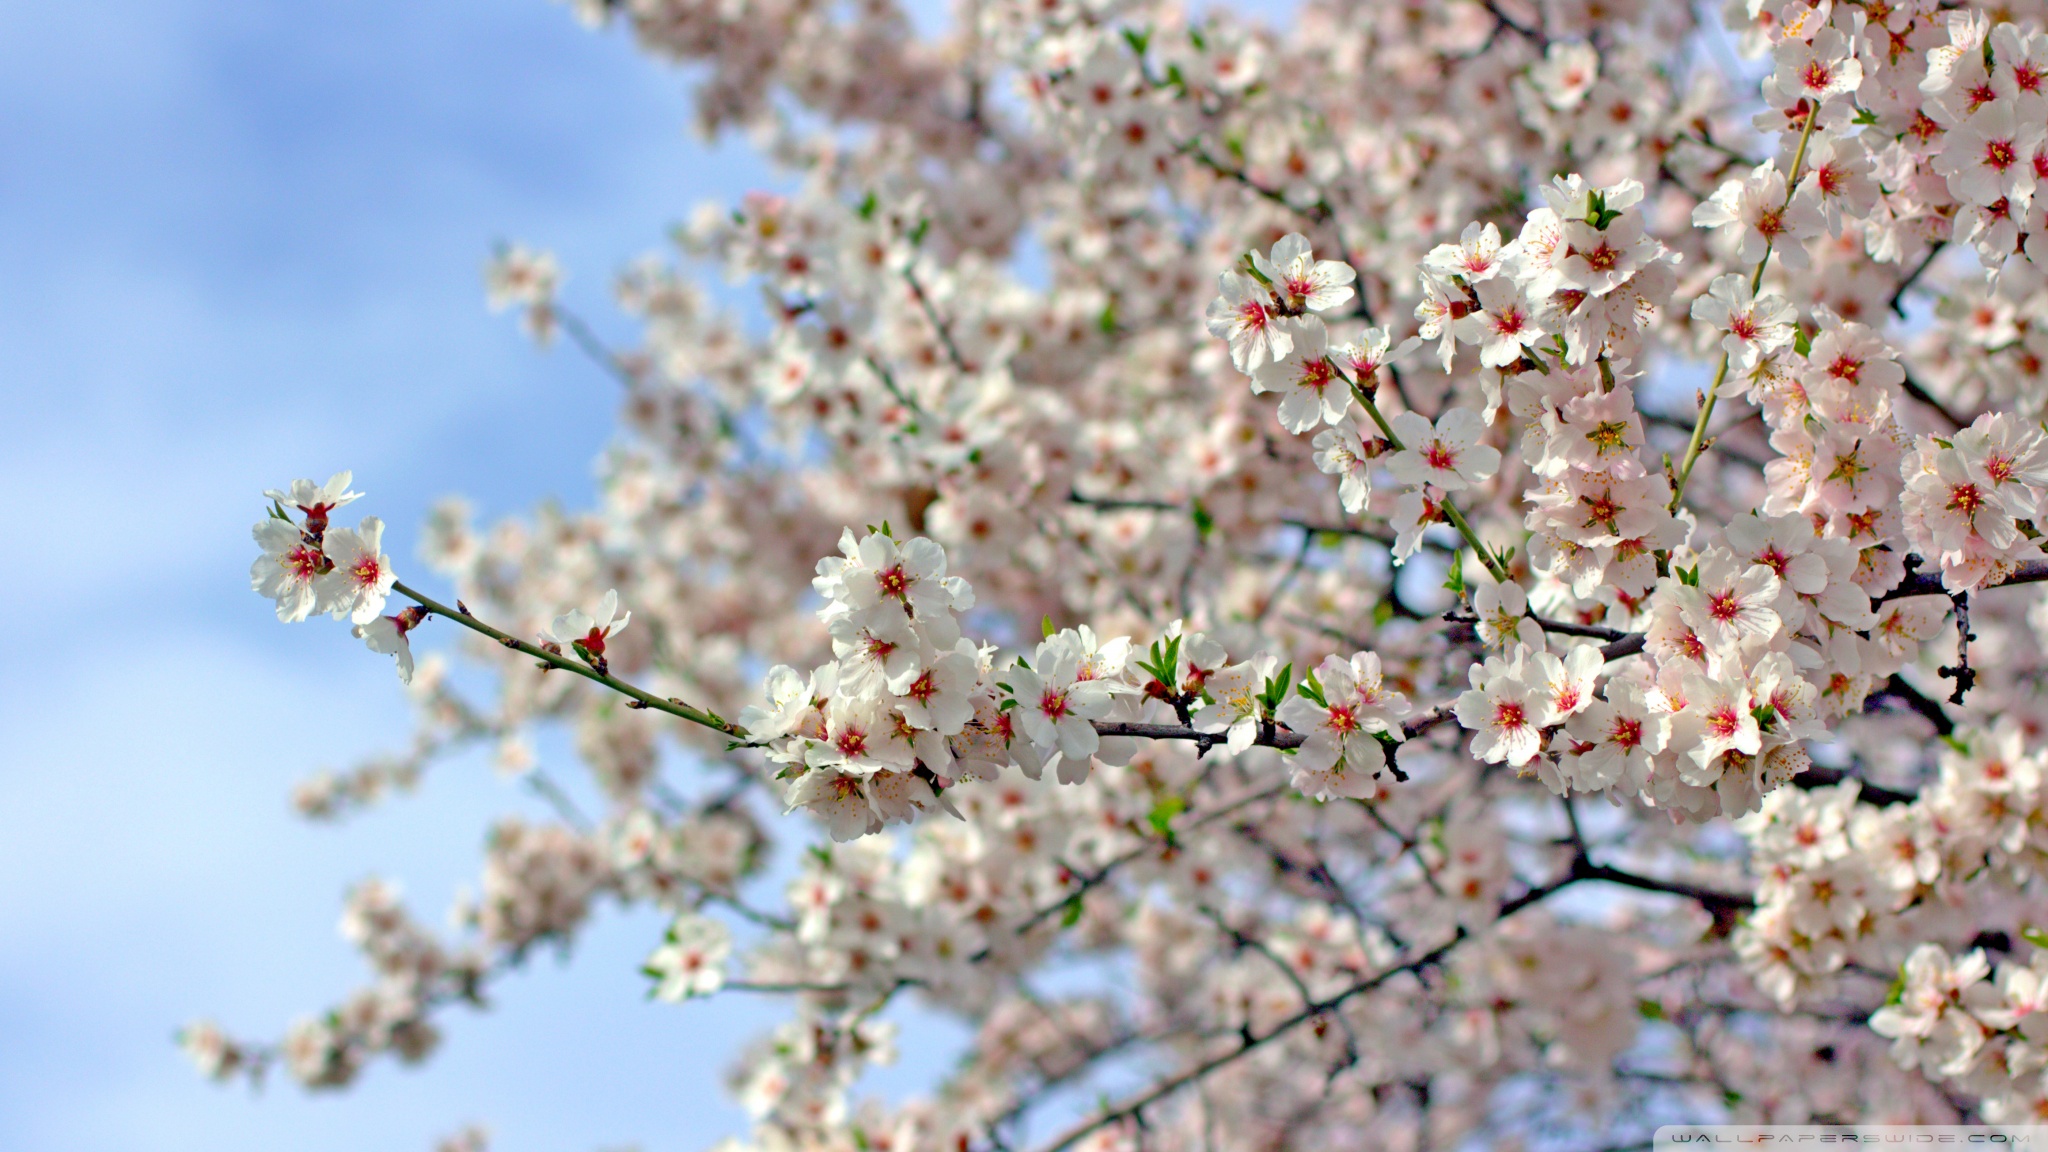 Almond Blossoms Ultra HD Desktop Background Wallpaper for: Multi Display, Dual Monitor, Tablet